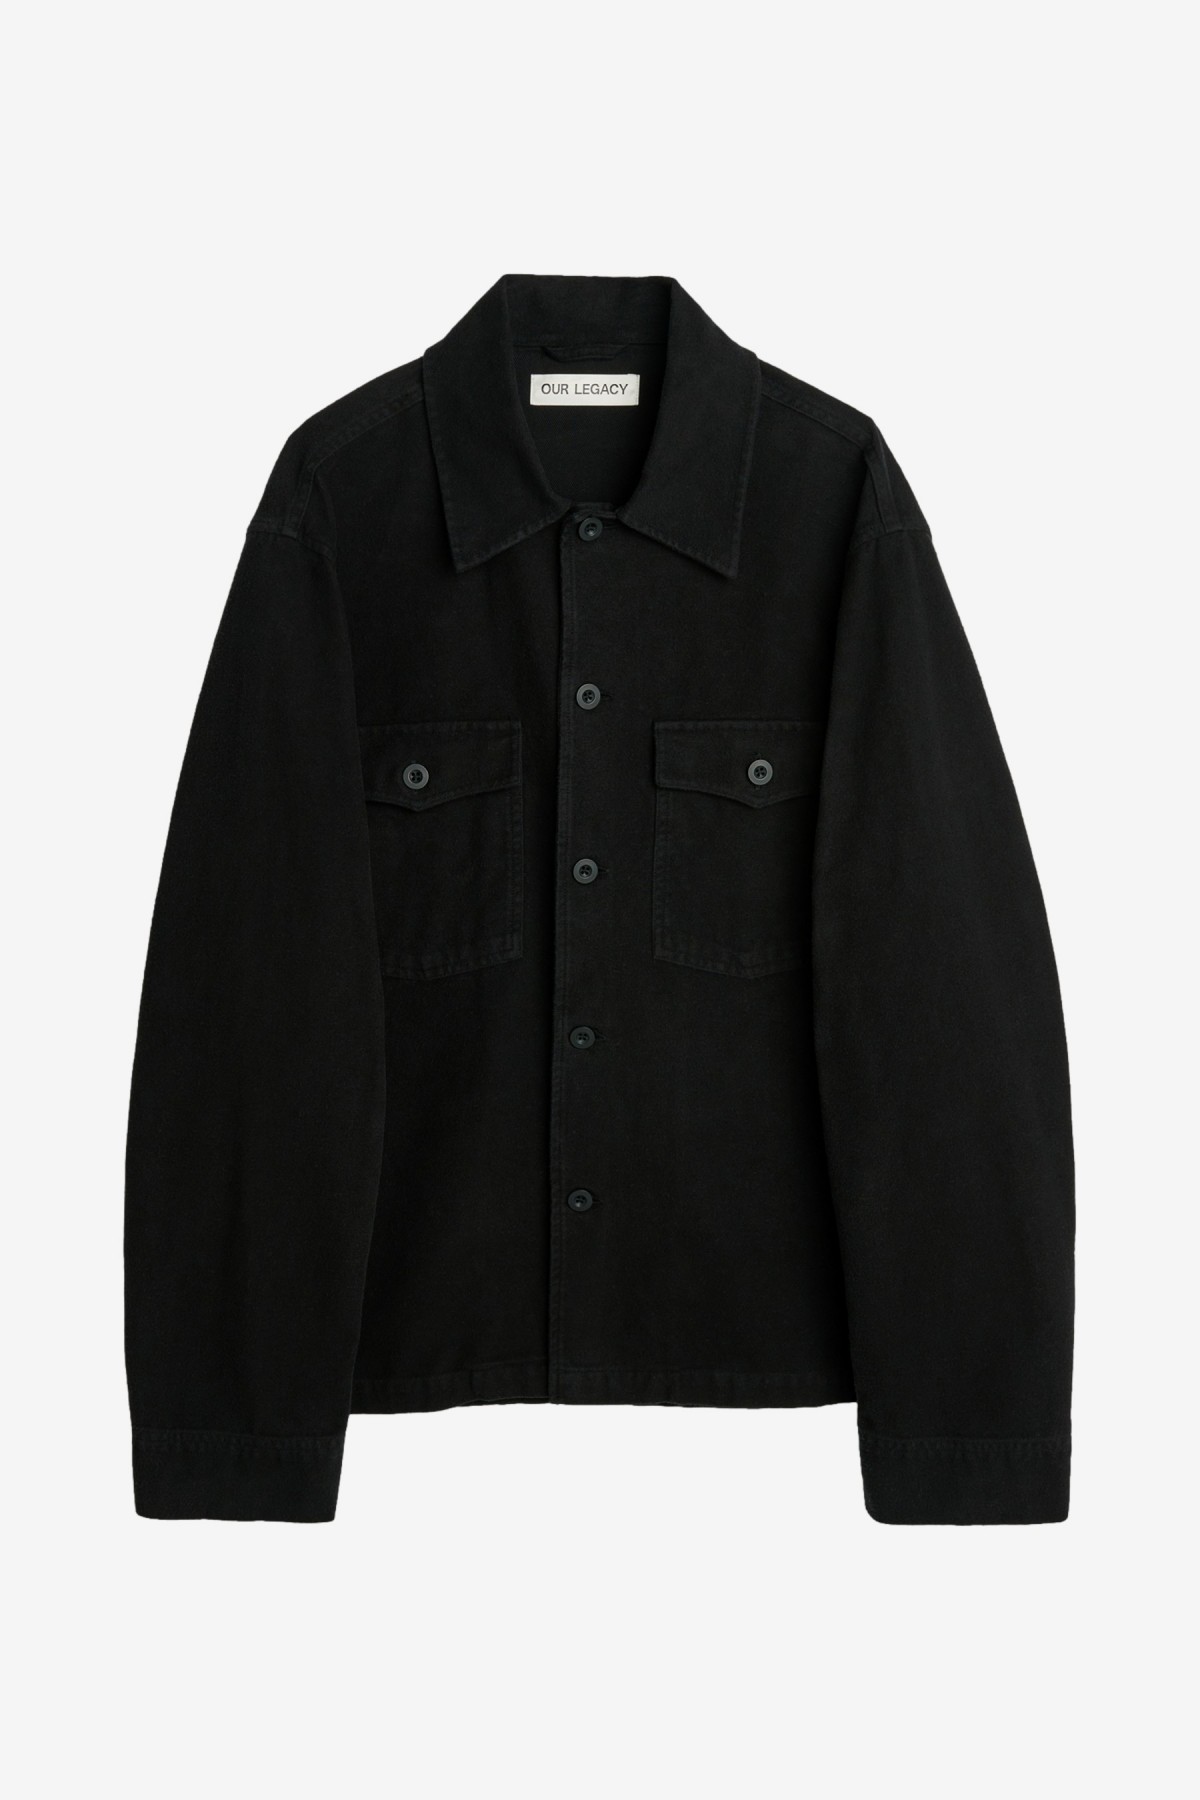 Our Legacy Evening Coach Jacket in Black Brushed Cotton